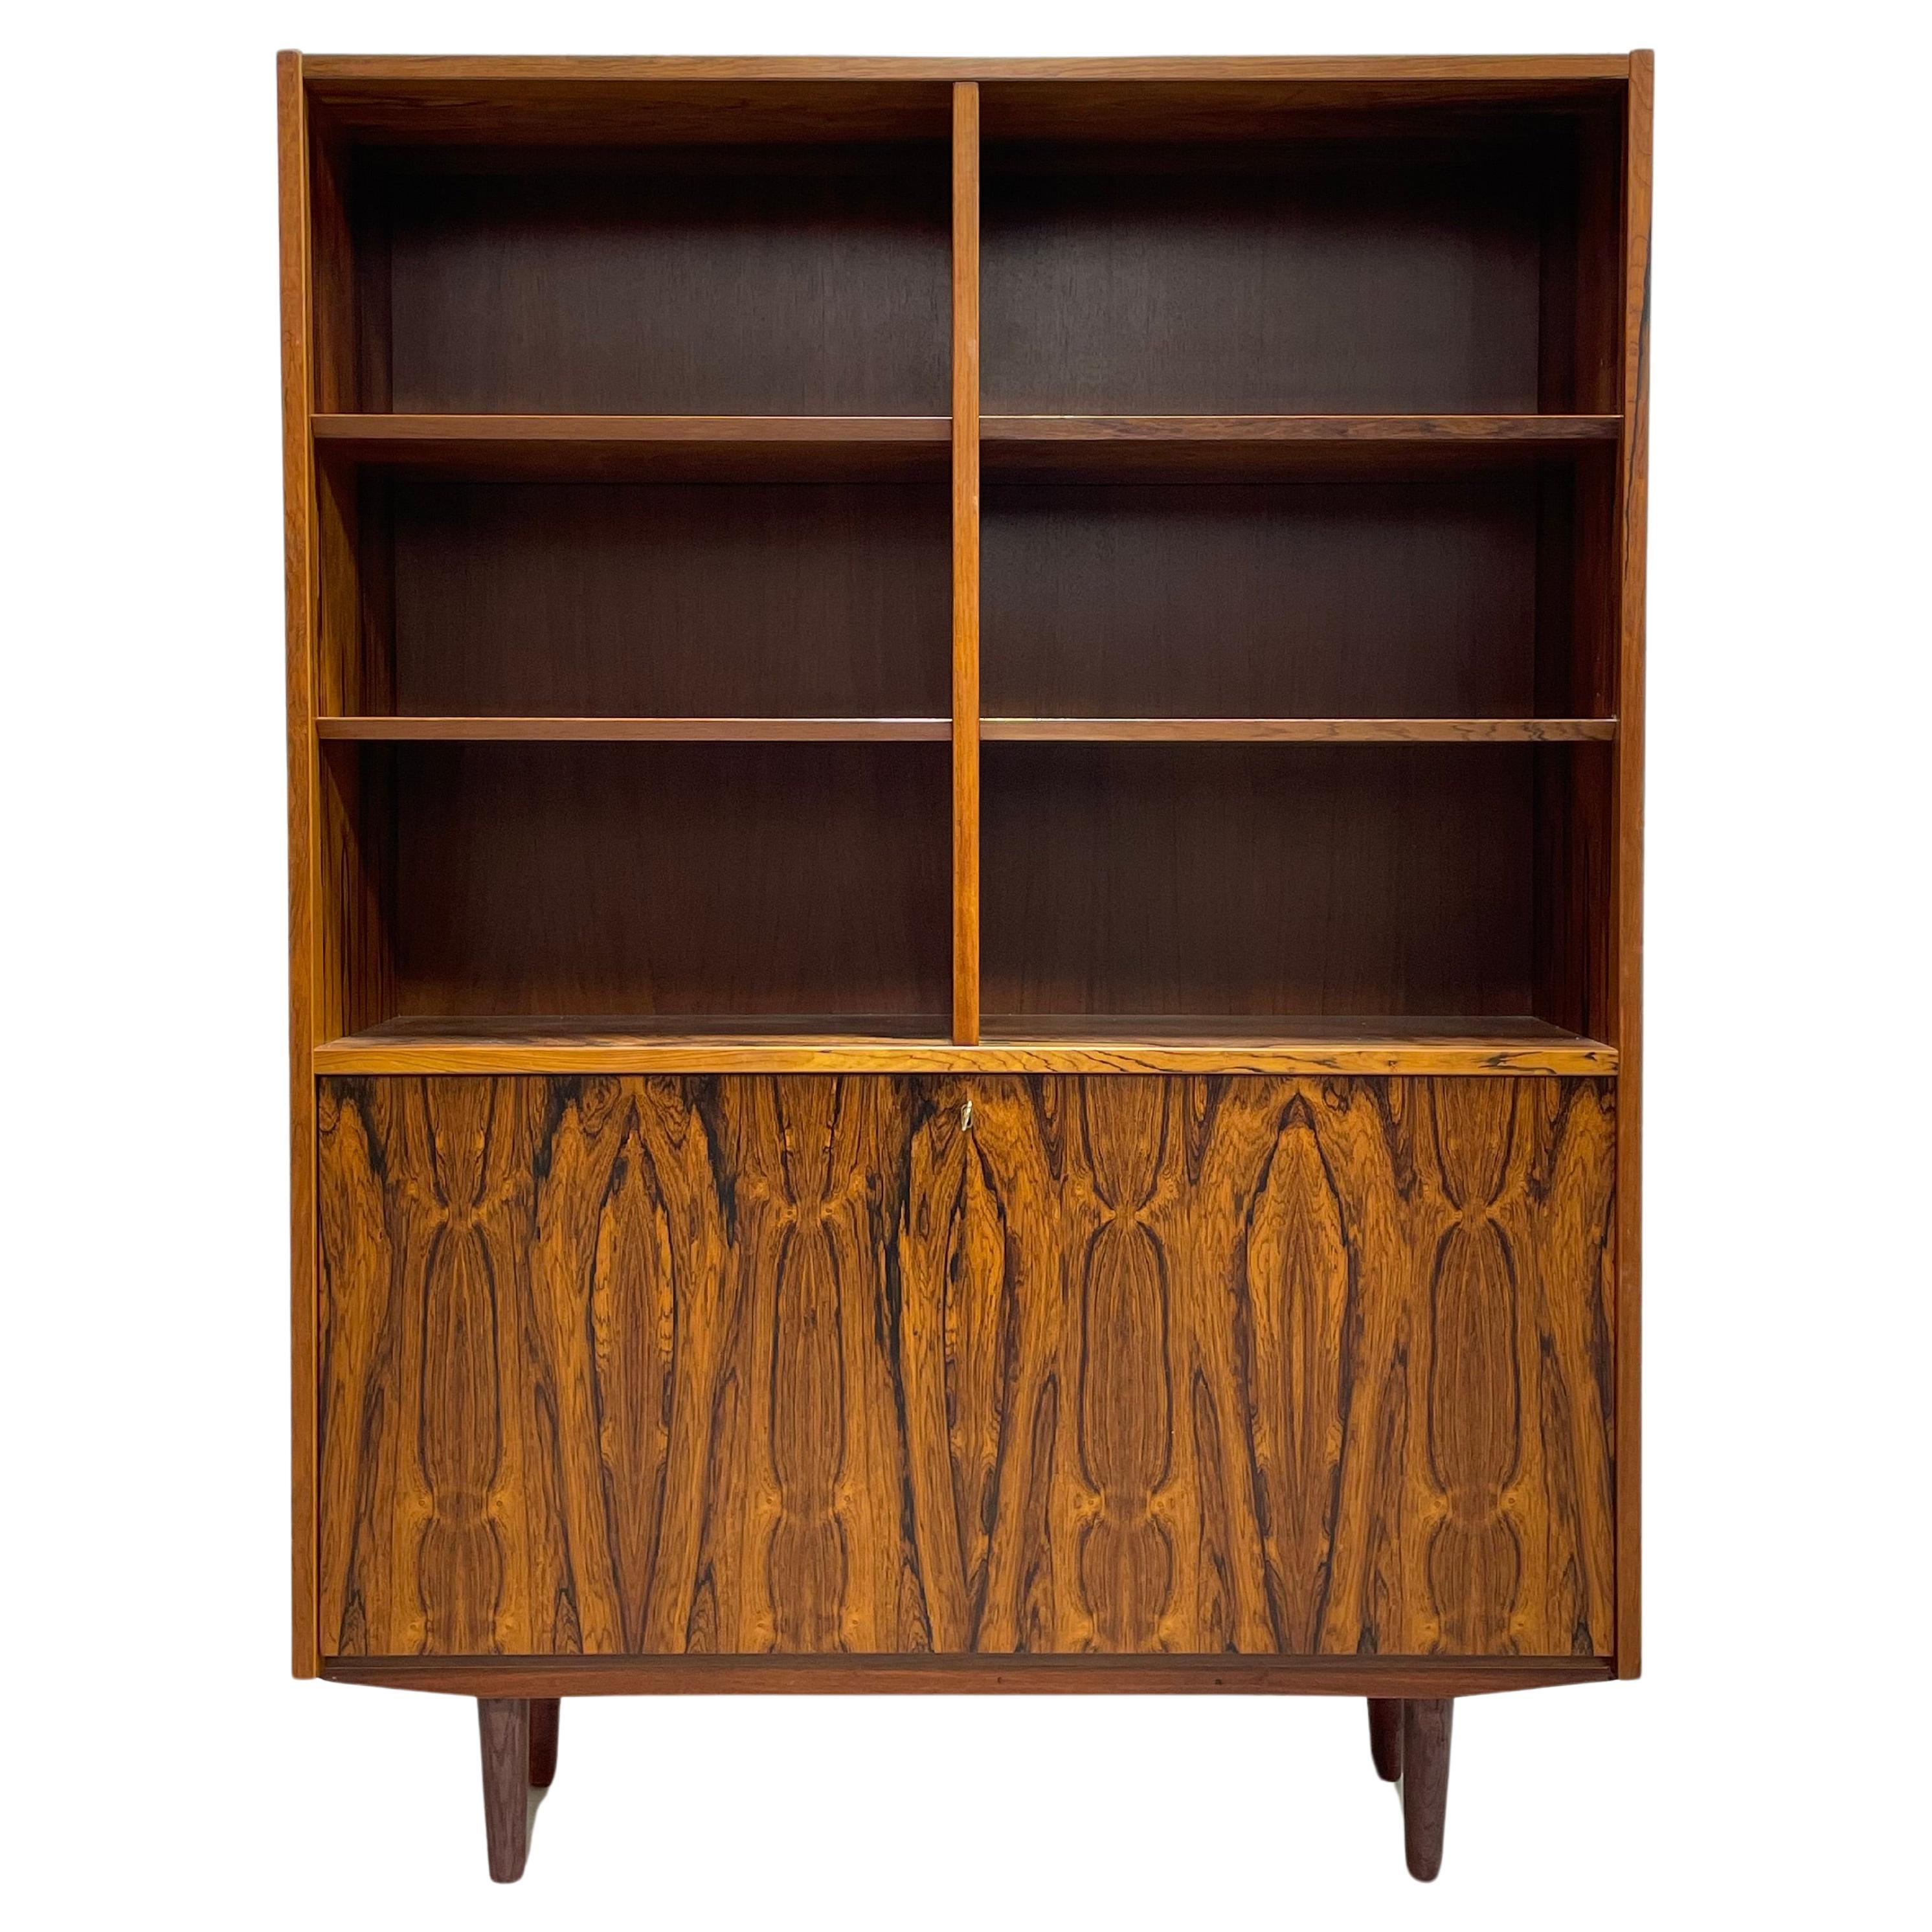 DANISH Mid Century Modern ROSEWOOD BOOKCASE / China Cabinet, c. 1960's For Sale